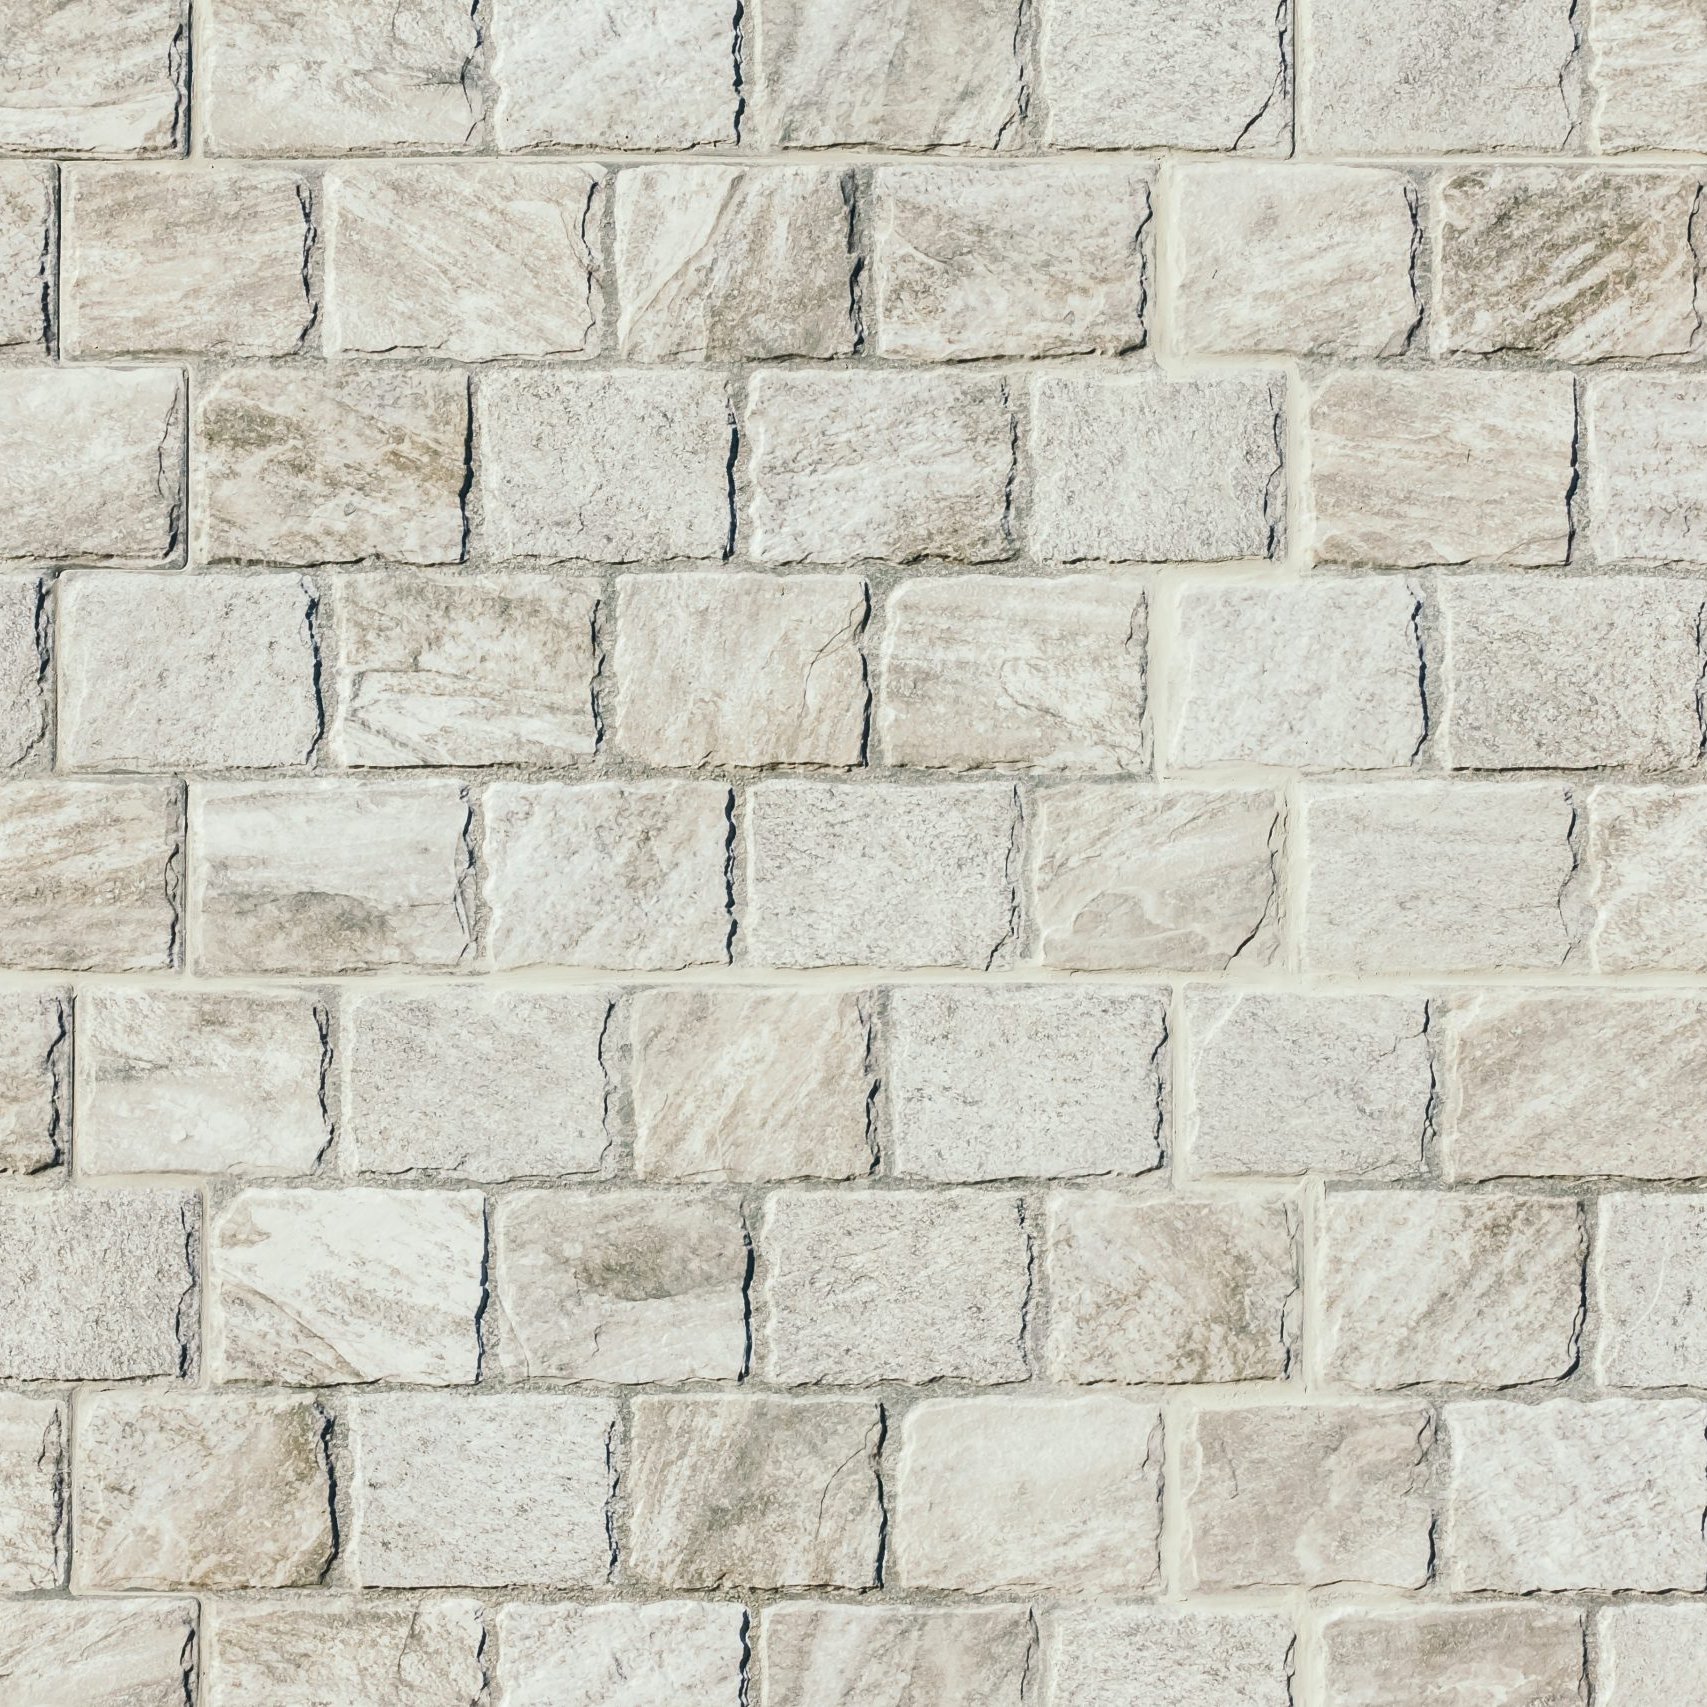 Brick wall textures for background - Vintage Light Filter